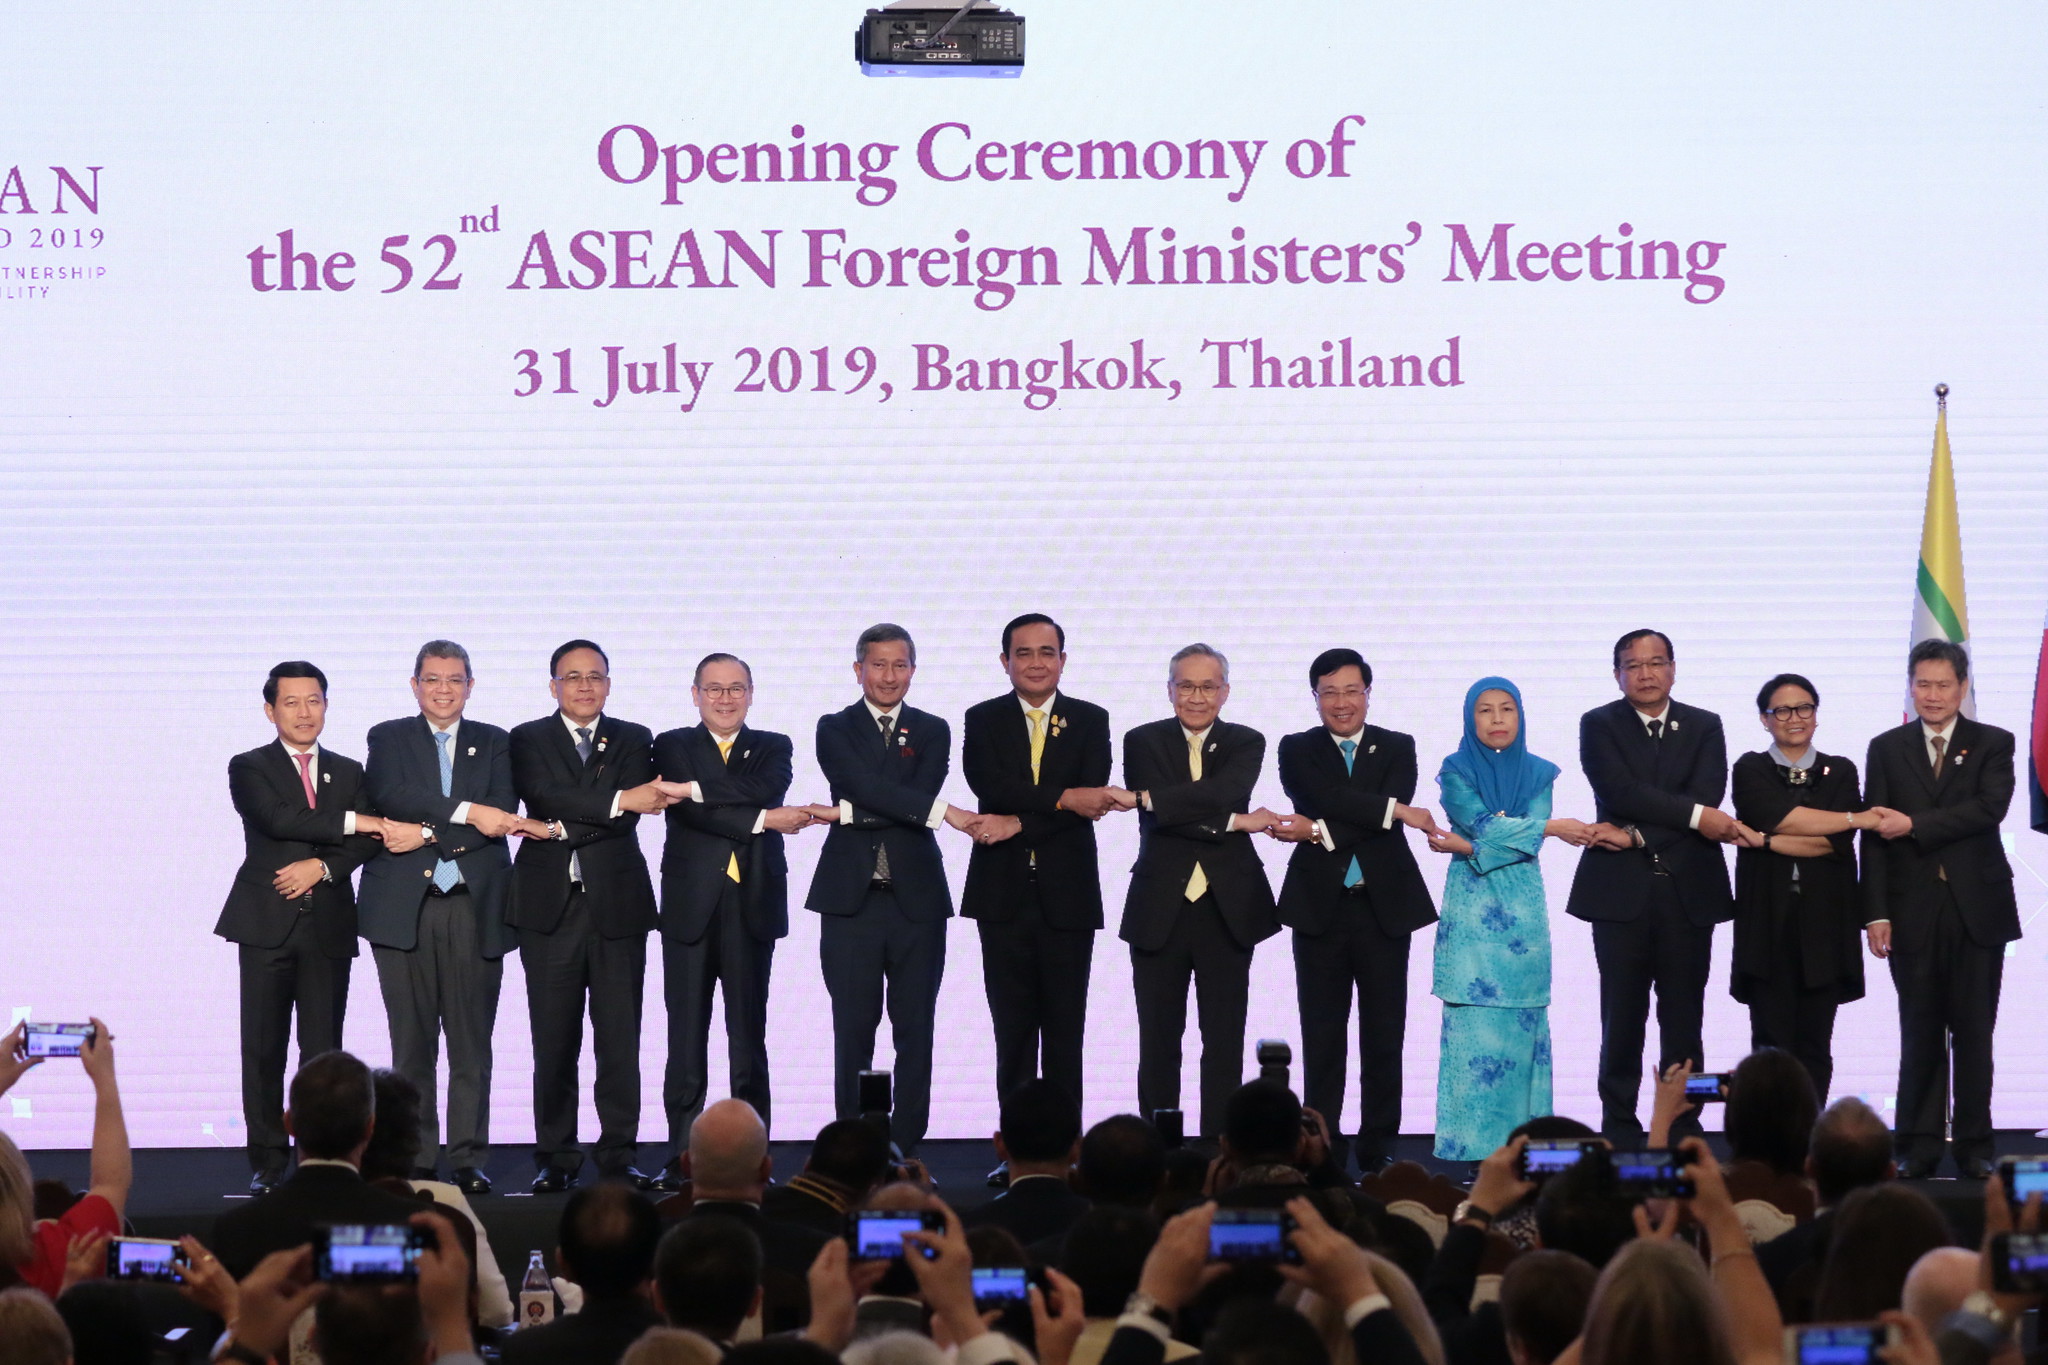 Joint Communique of the 52nd ASEAN Foreign Ministers’ Meeting ASEAN